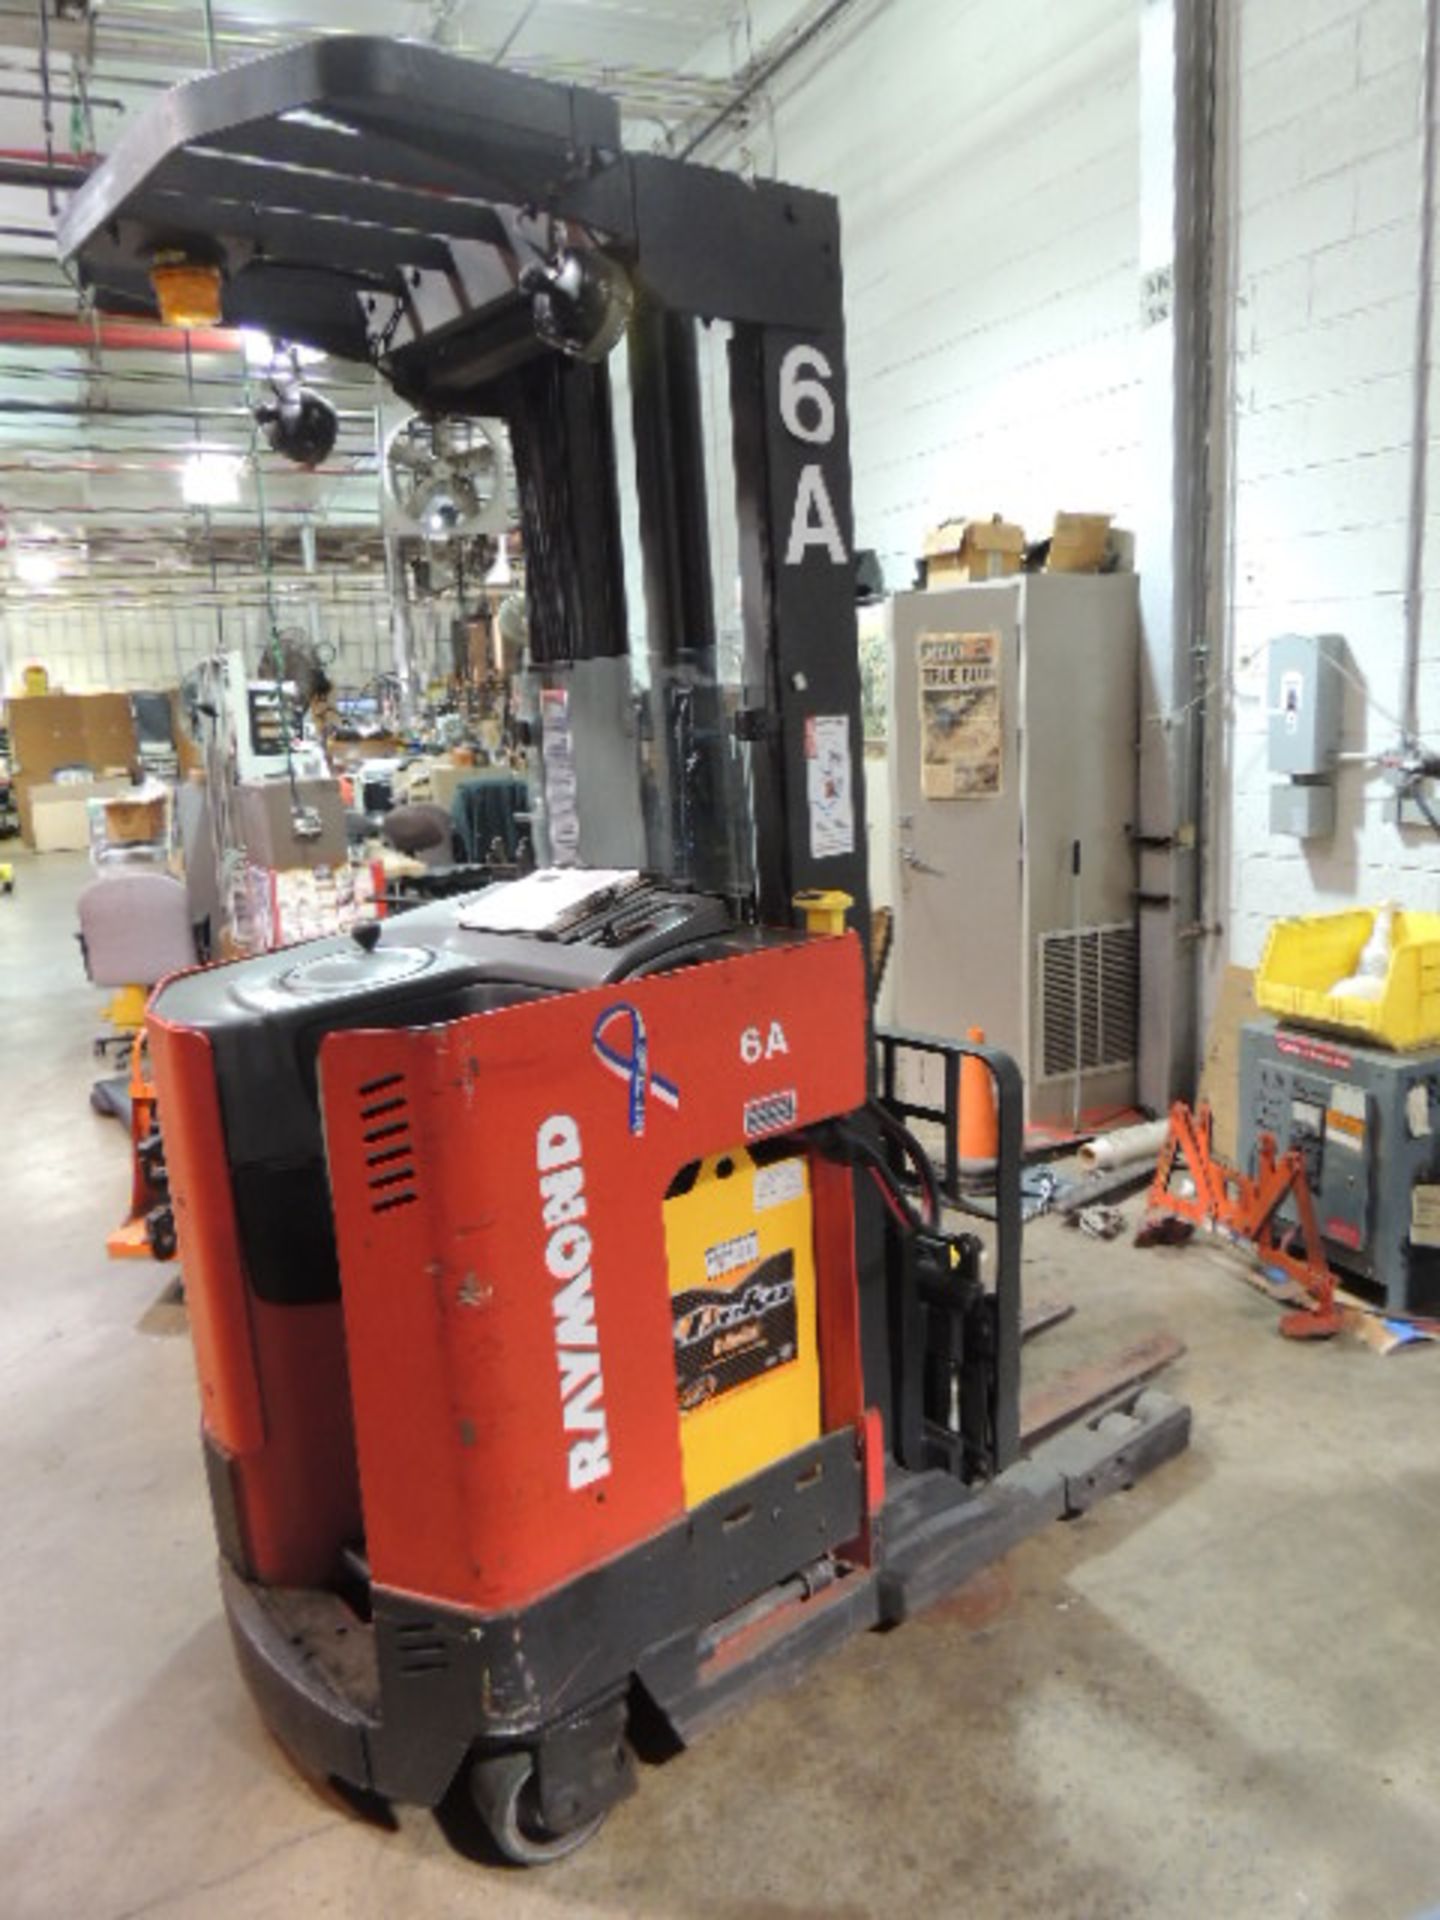 Raymond R3011 Forklift, 3000lb capacity, 36" forks, 2 stage mast, stand up , 24 volt electric w/